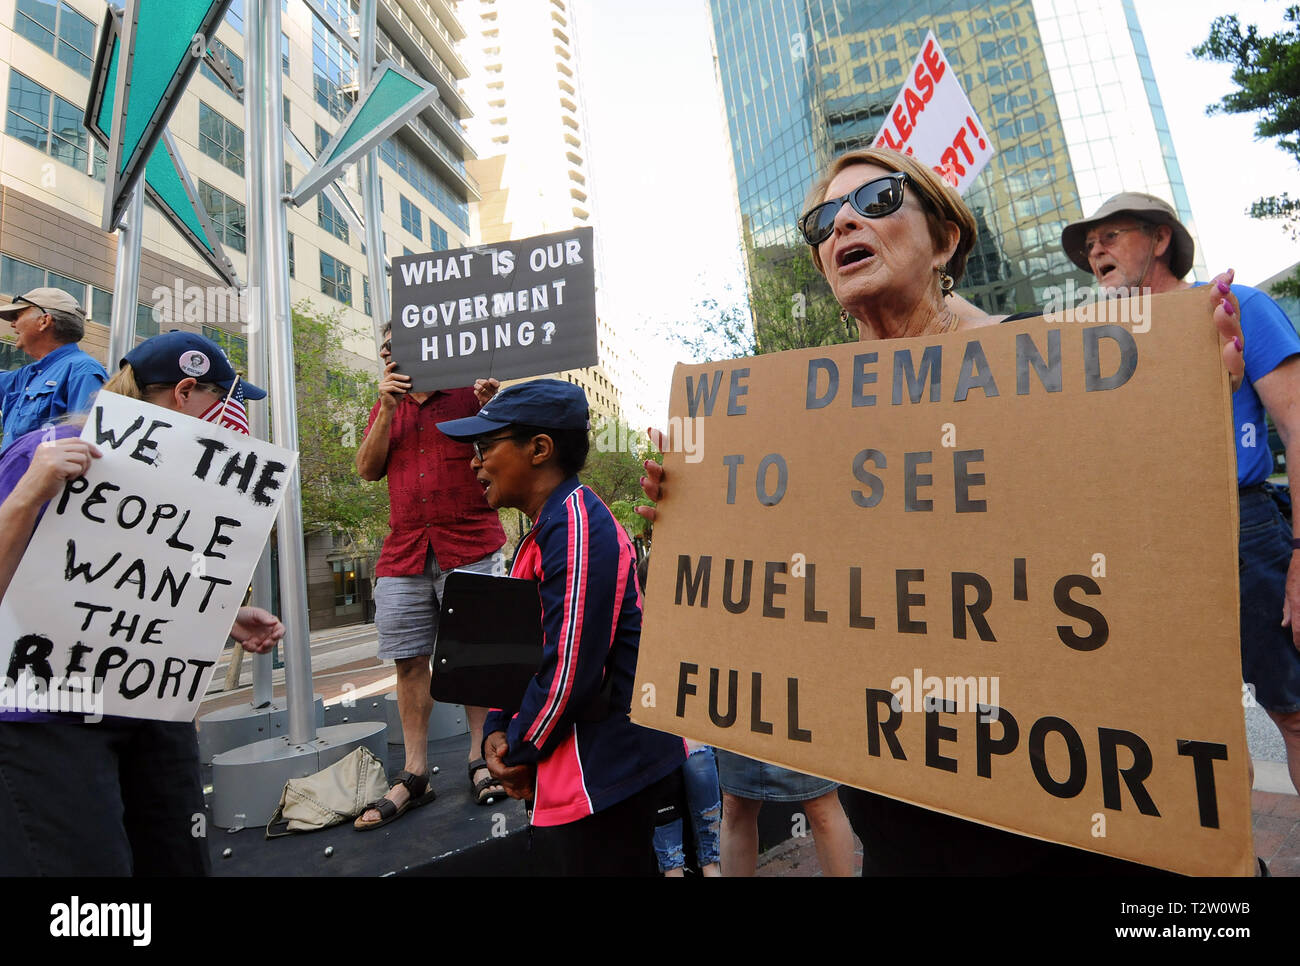 Orlando, Florida, USA. 04th Apr, 2019. Protesters demonstrate outside the office of U.S. Senator Marco Rubio (R-FL) demanding the release by Attorney General William Barr of the report of Special Counsel Robert Mueller's investigation of President Donald Trump on April 4, 2019 in Orlando, Florida. Similar protests were held across the country. (Paul Hennessy/Alamy) Credit: Paul Hennessy/Alamy Live News Stock Photo